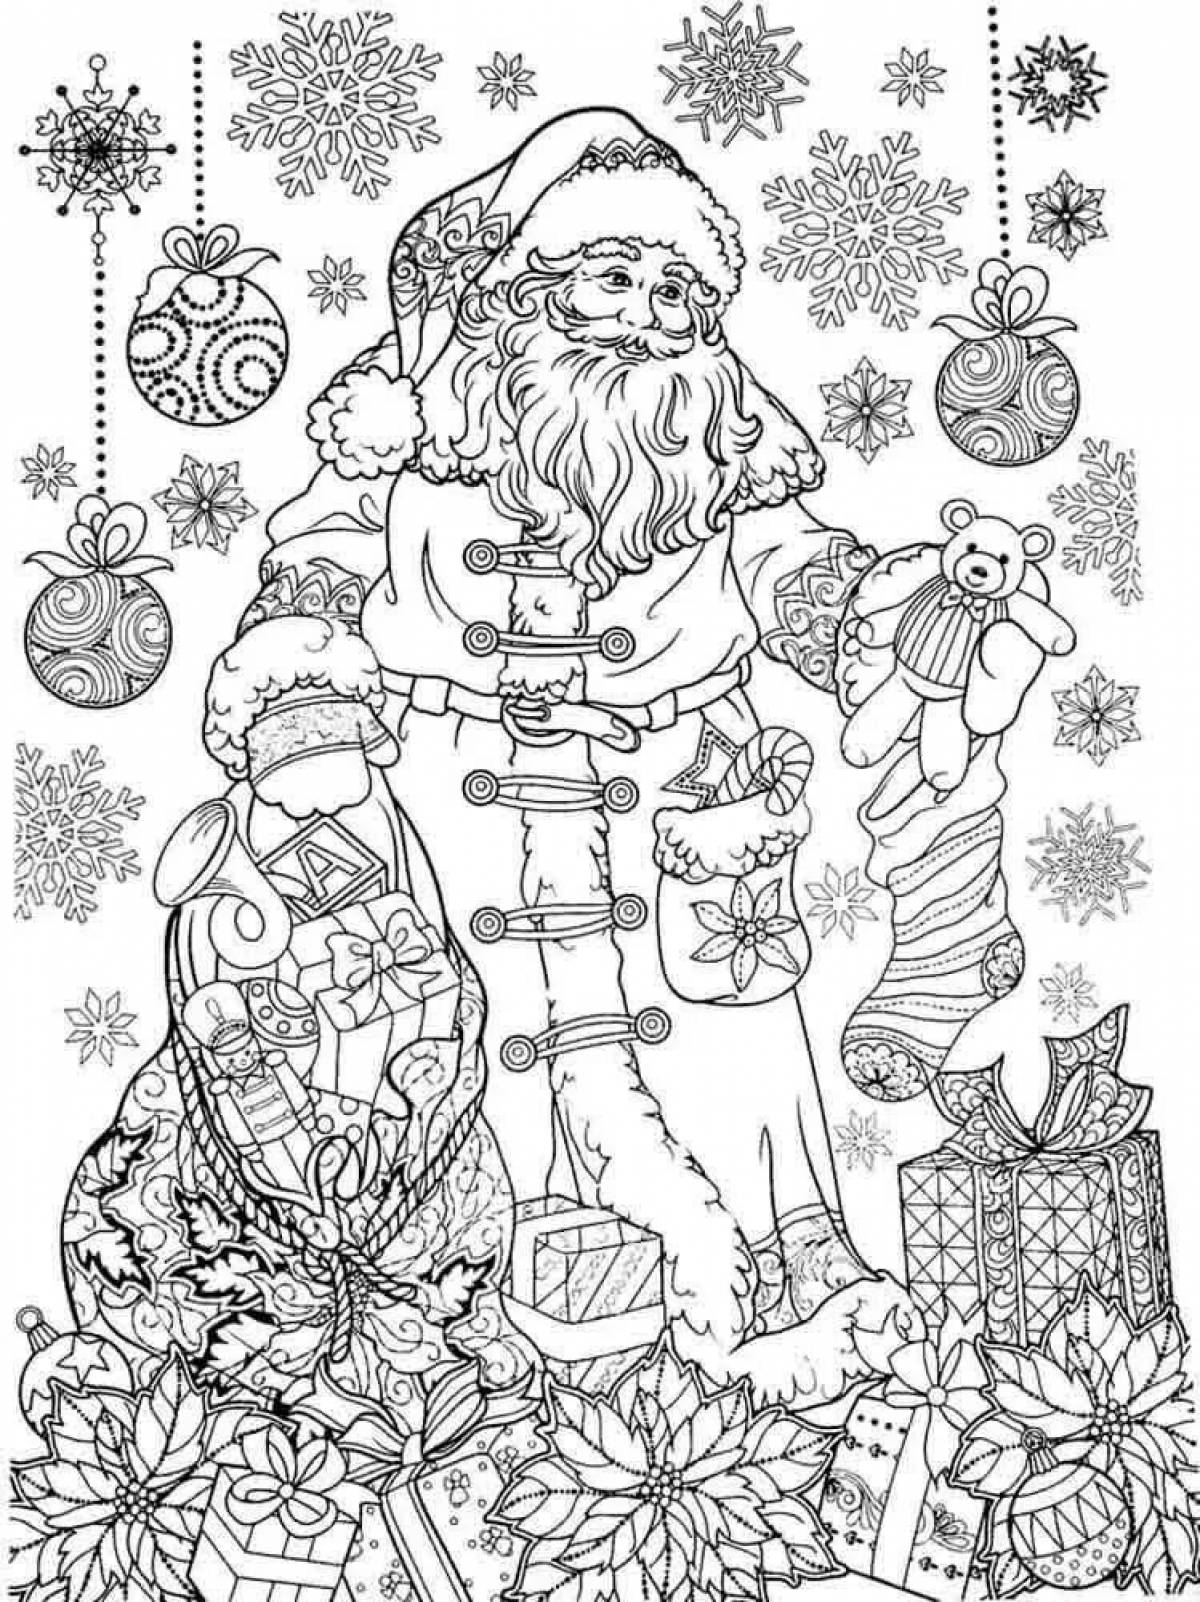 Exciting Christmas coloring book for adults